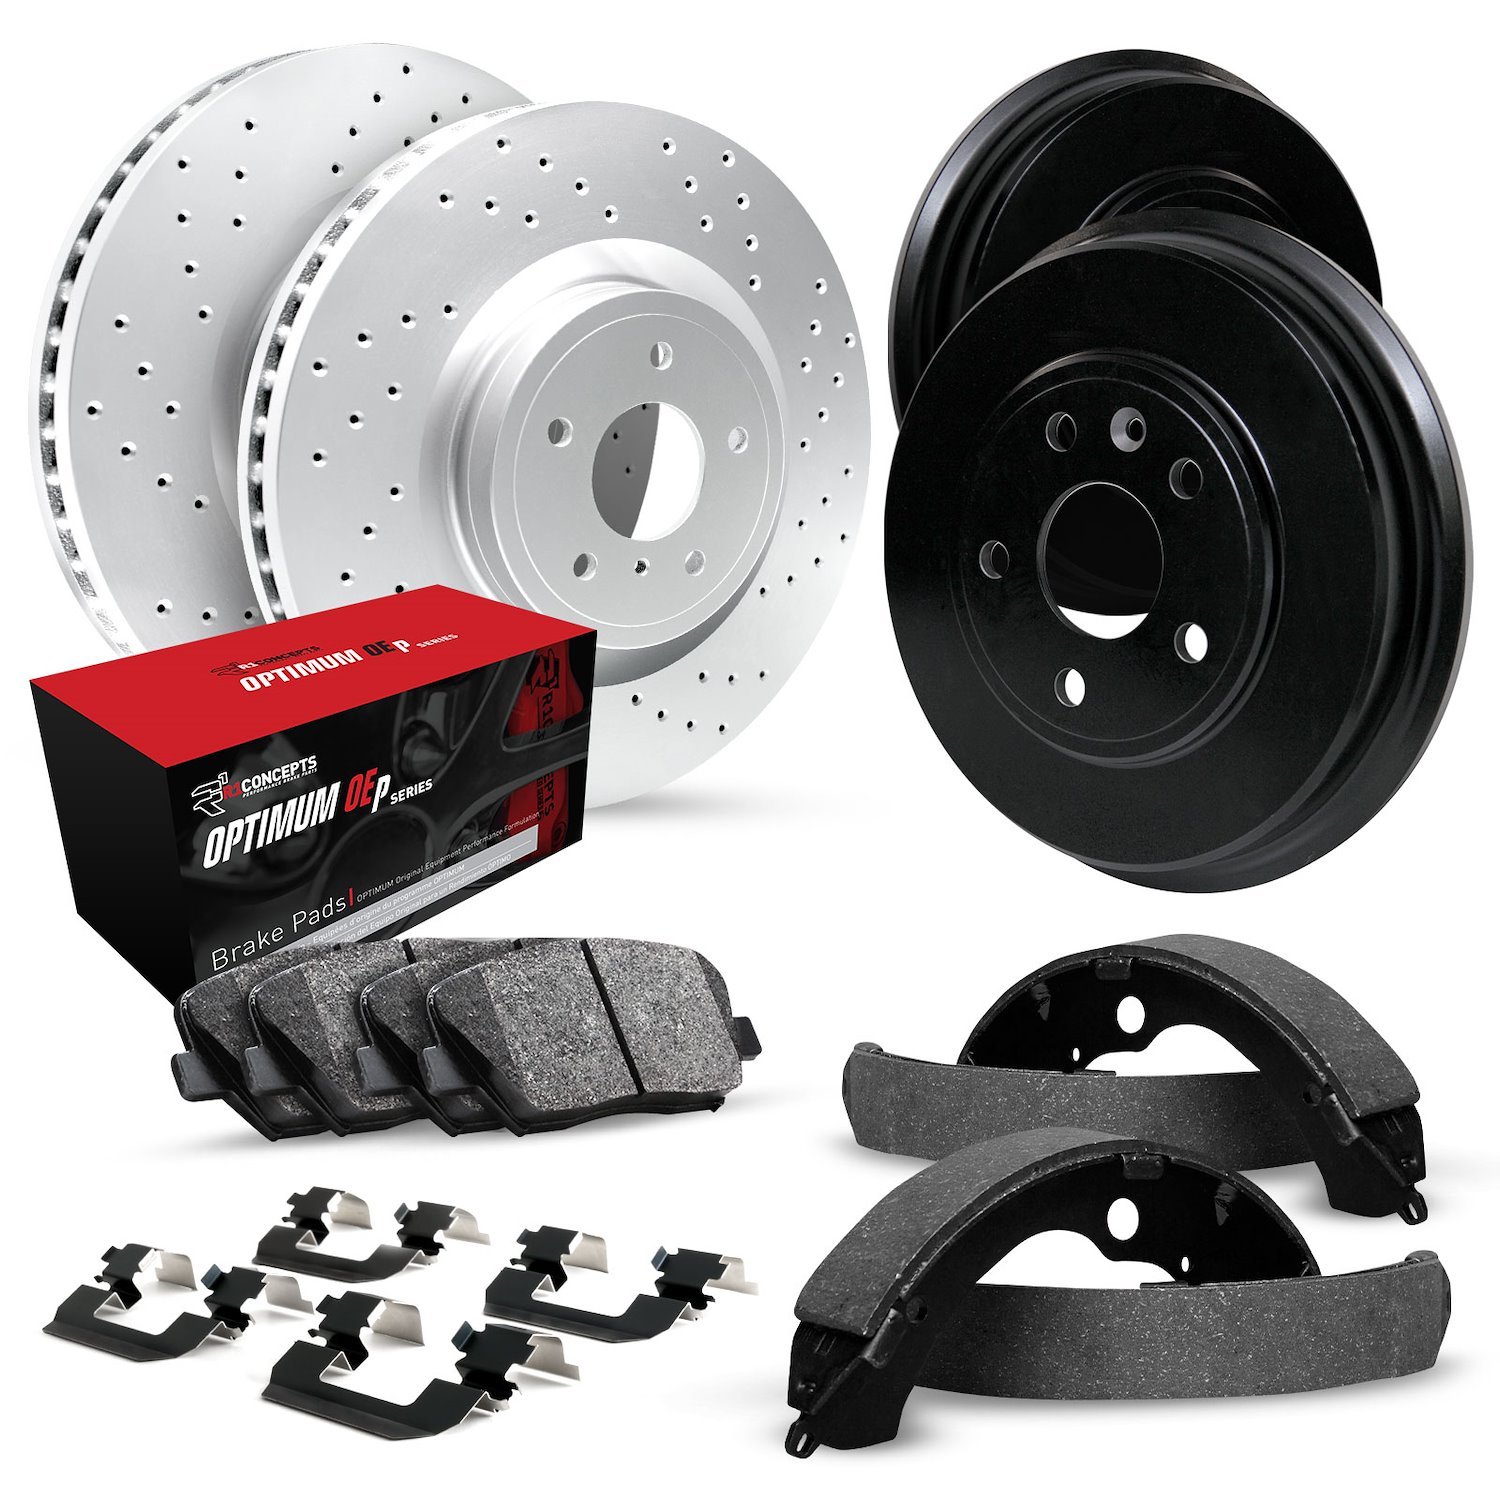 GEO-Carbon Drilled Brake Rotor & Drum Set w/Optimum OE Pads, Shoes, & Hardware, 2002-2007 GM, Position: Front & Rear